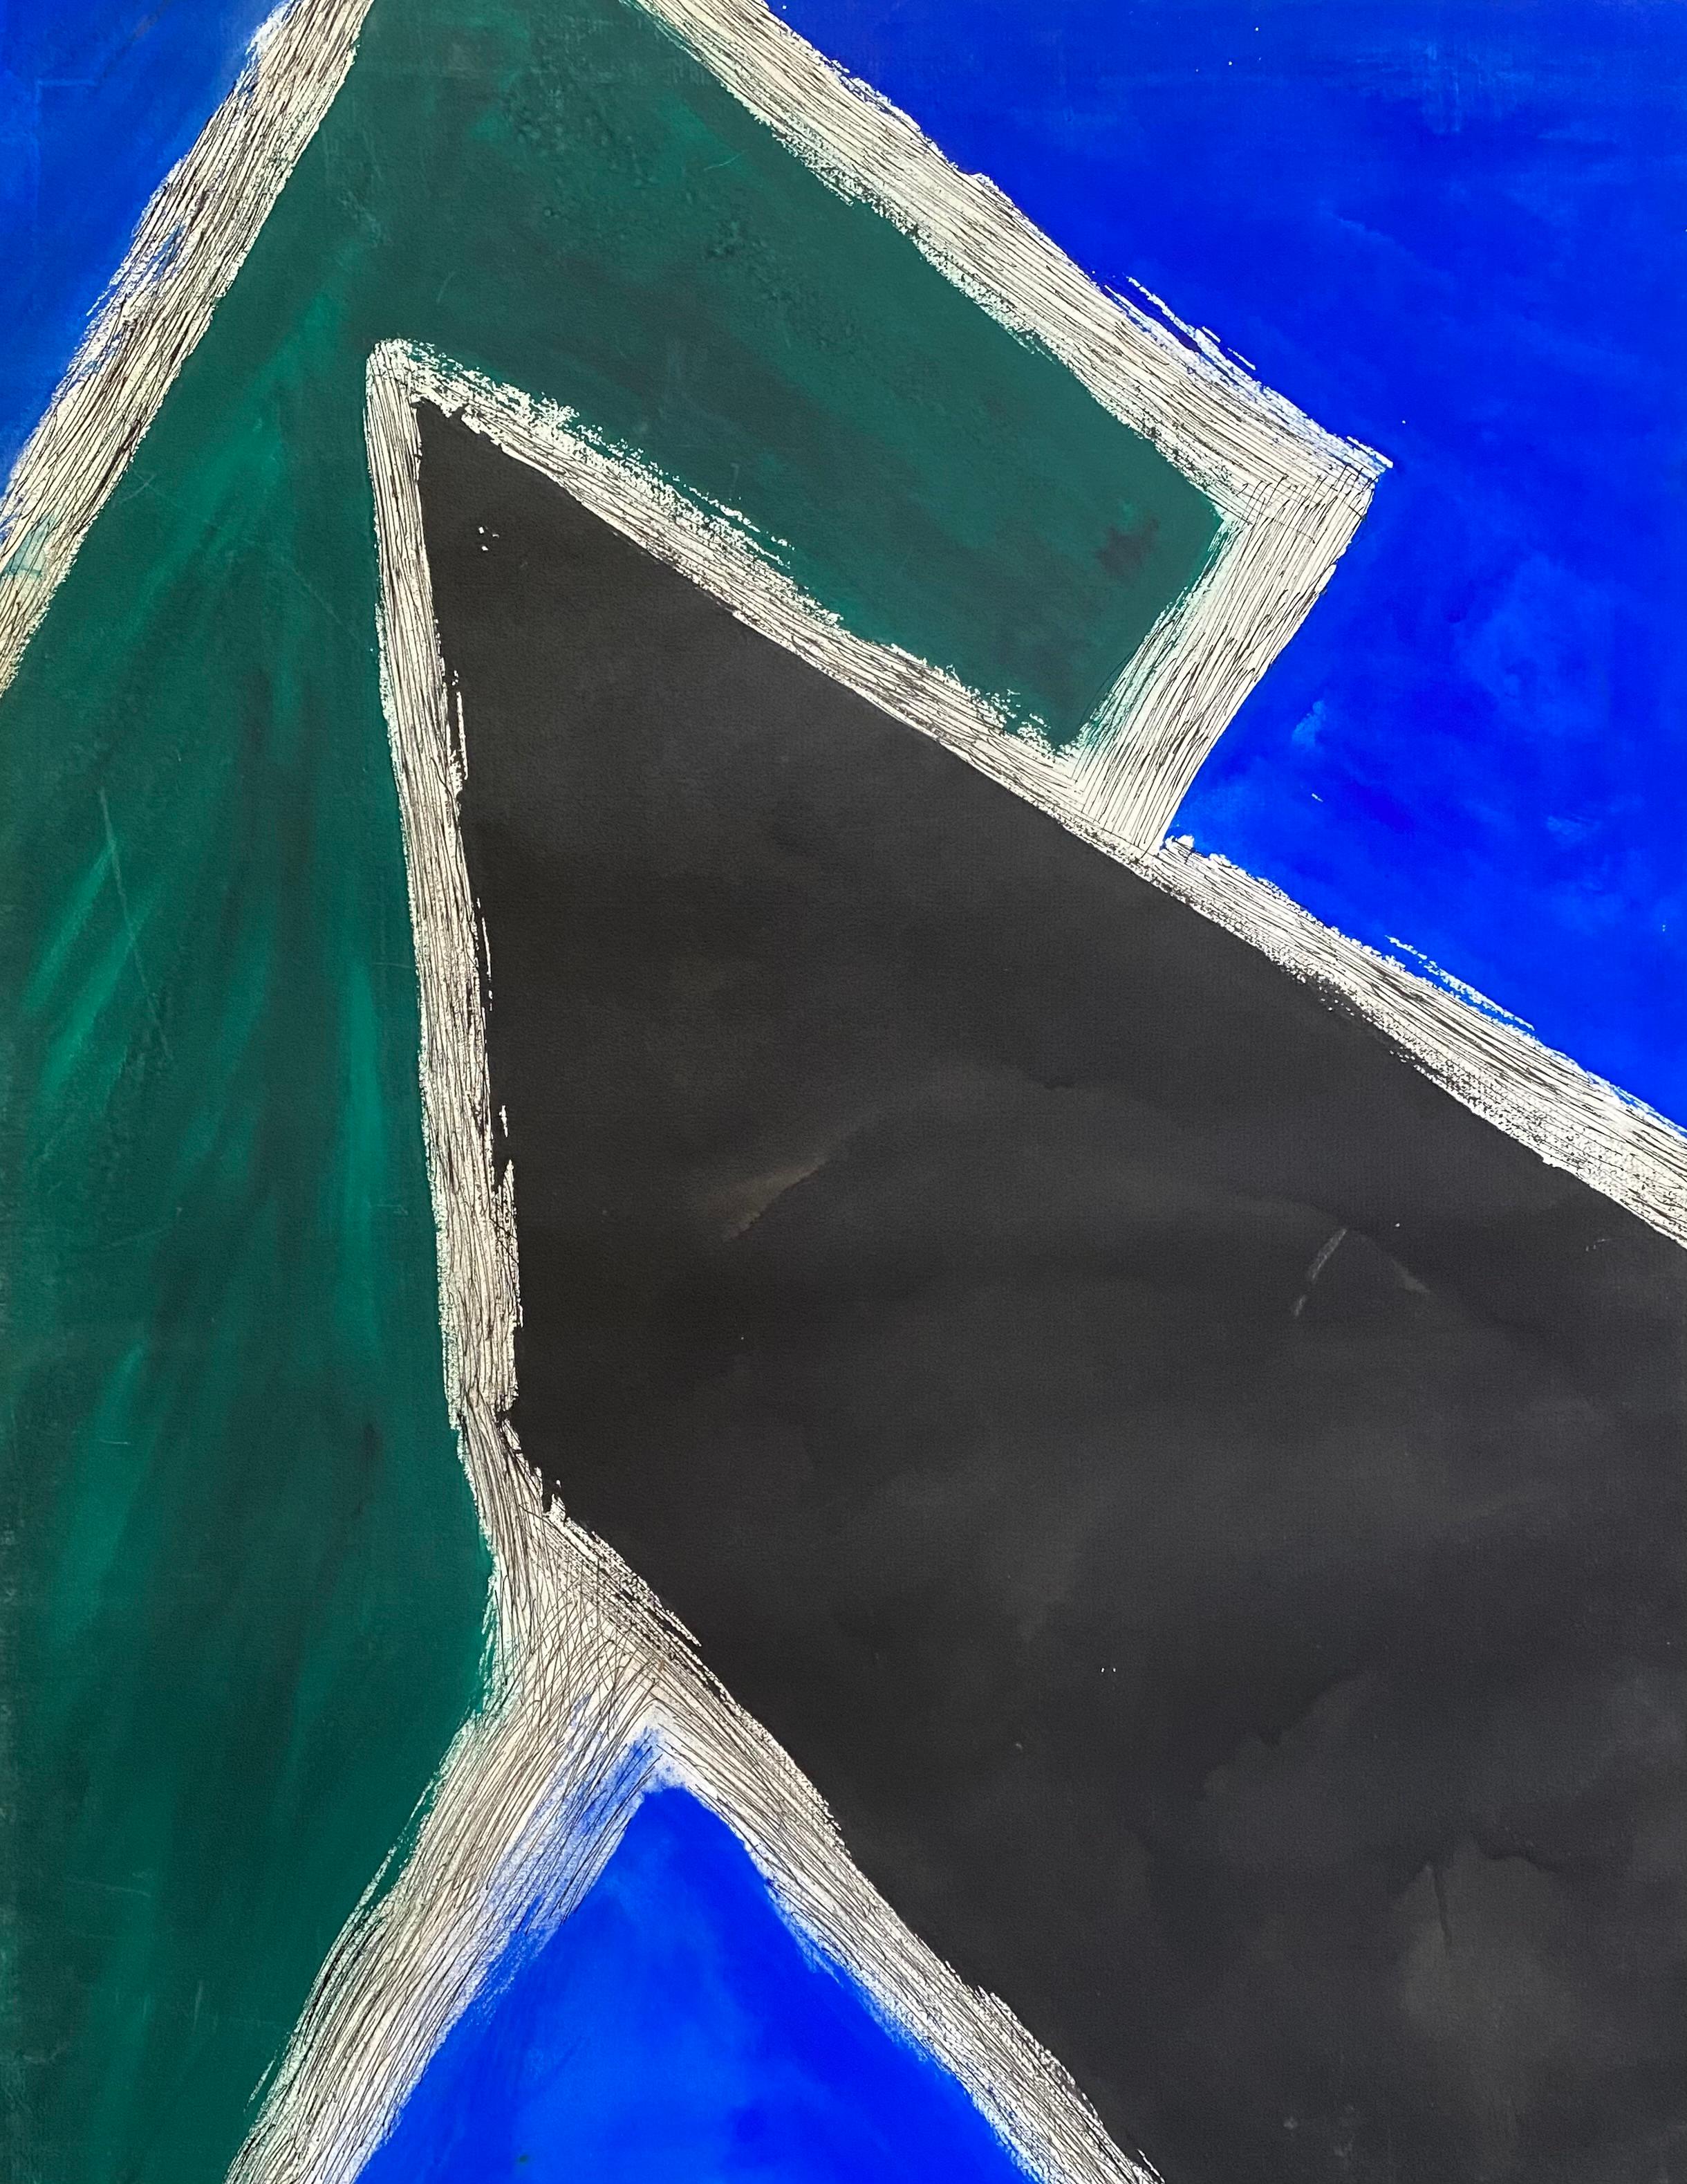 “Abstract in Blue, Black and Green” - Post-Modern Art by Lloyd Raymond Ney